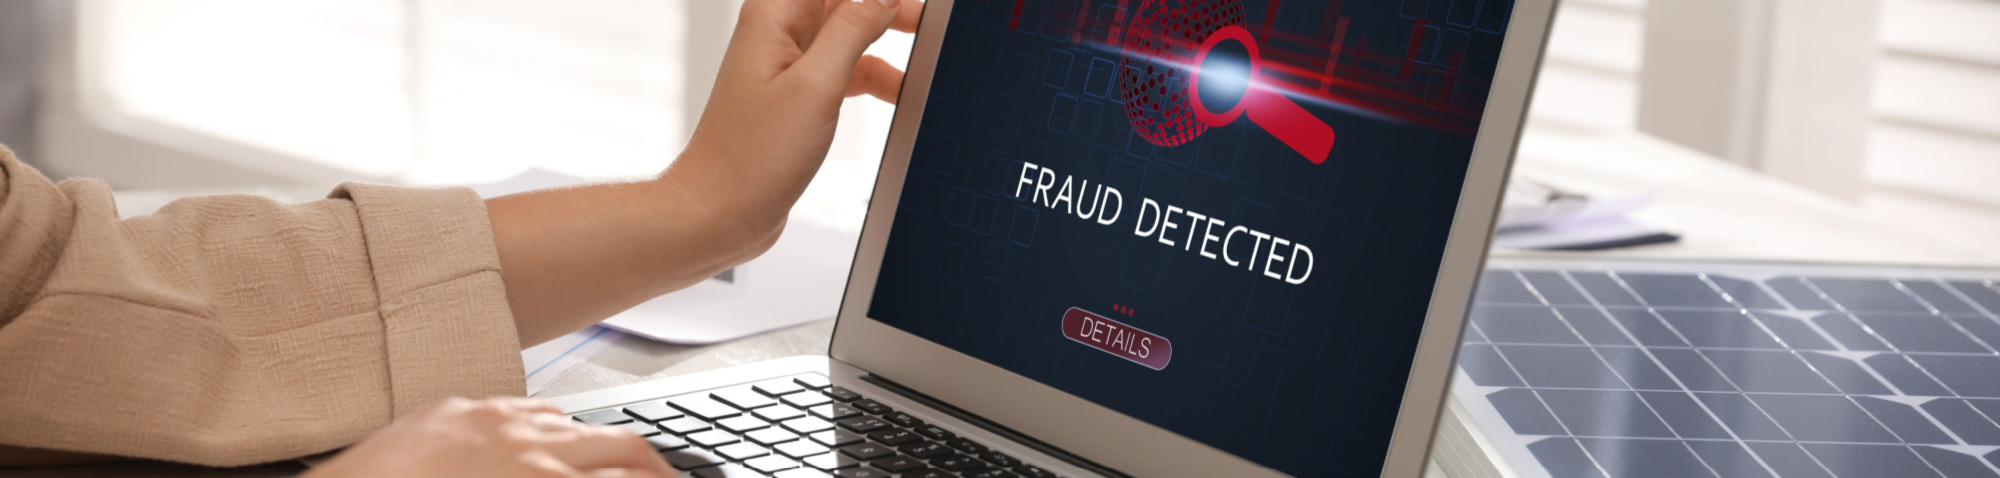 image of high risk credit card processing fraud detection and prevention